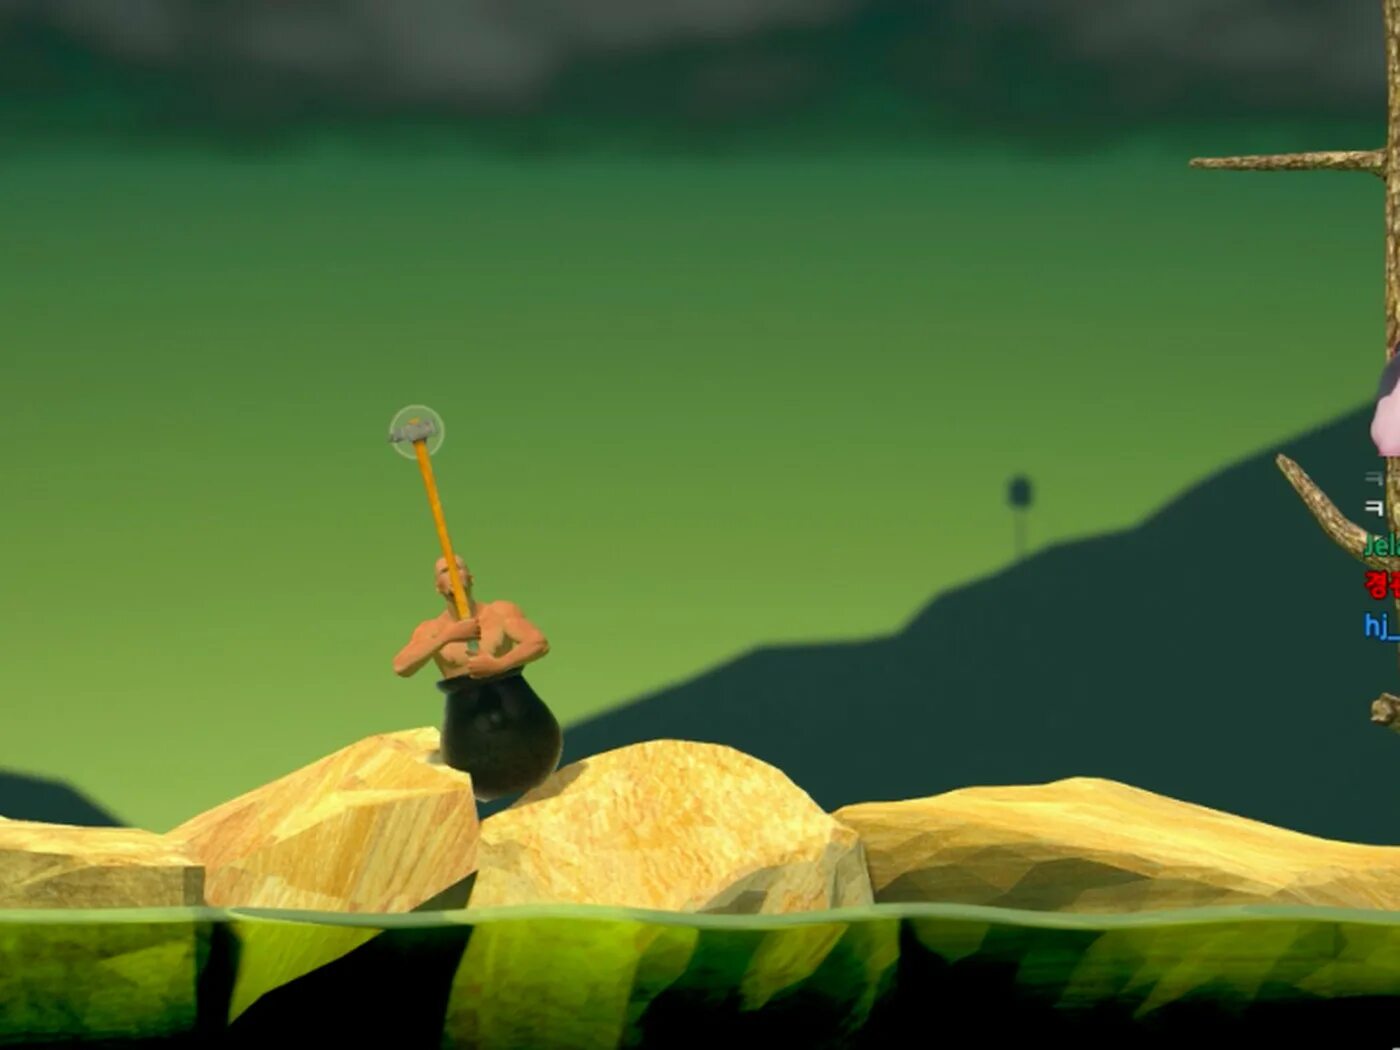 Game get help. Getting over it with Bennett Foddy. Getting over it with Bennett Foddy карта. Карта геттинг овер ИТ. Карта игры getting over it.